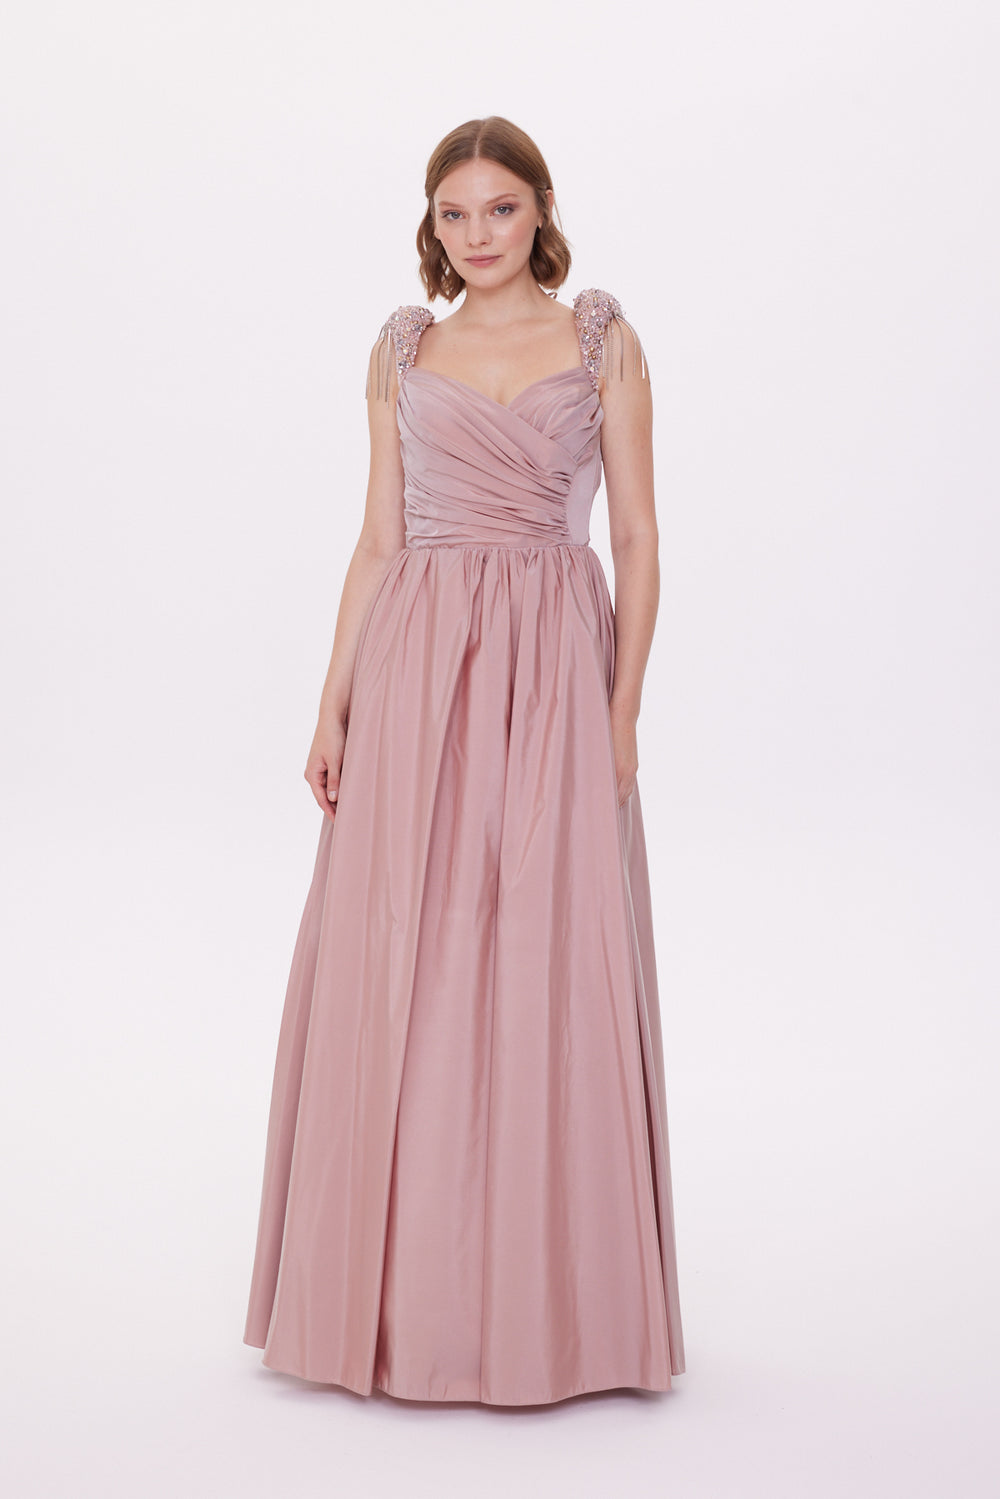 Taffeta Dress with Stone Embroidered Drape Detail on Shoulders